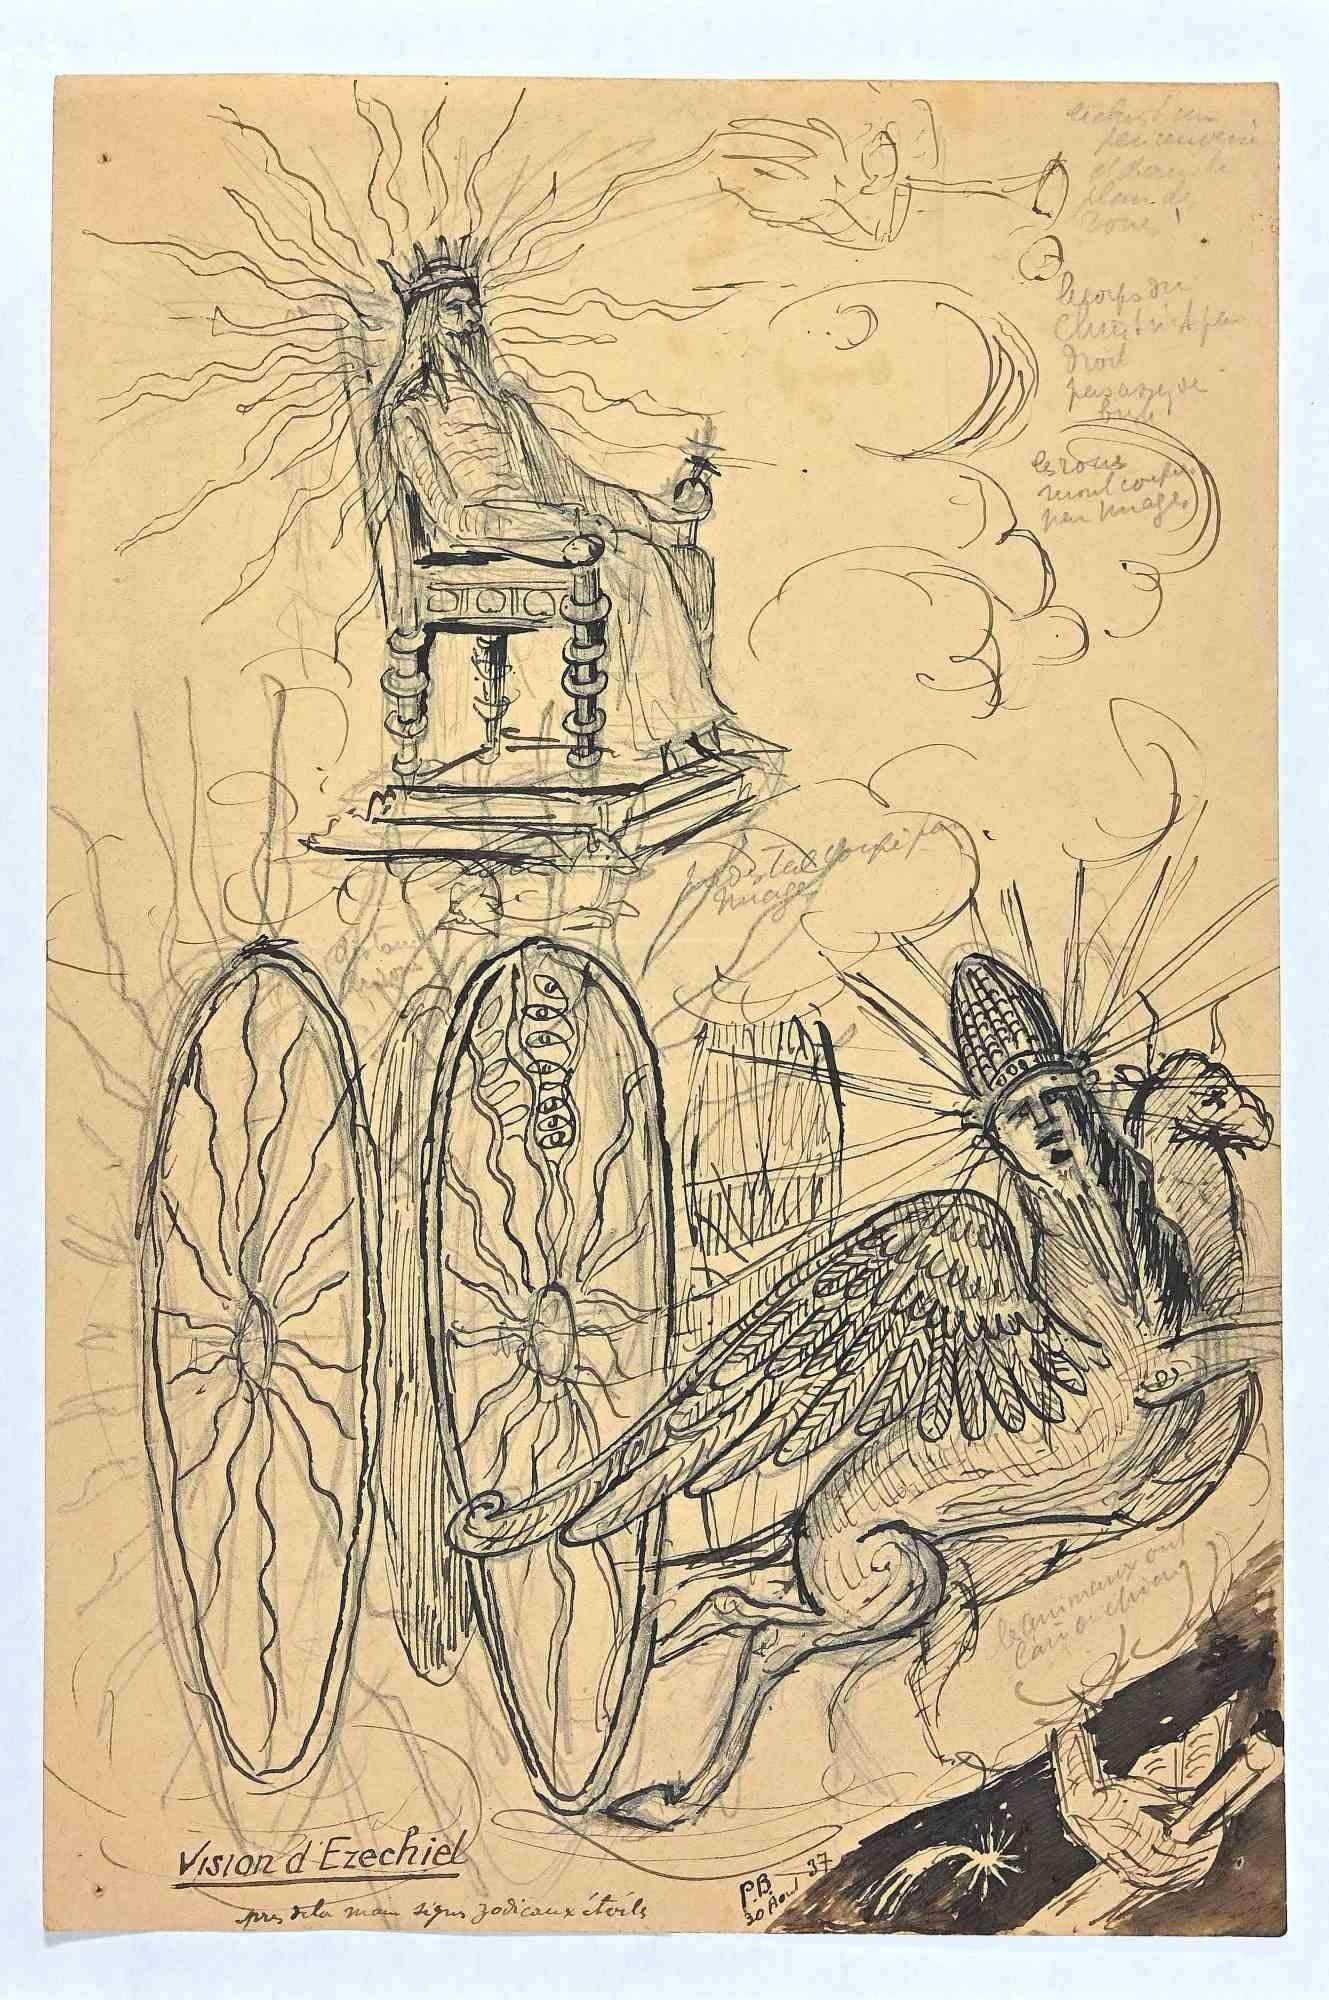 Unknown Figurative Art - The Sacred Flying Chariot - Ezekiel's Vision  - Drawing - 1937